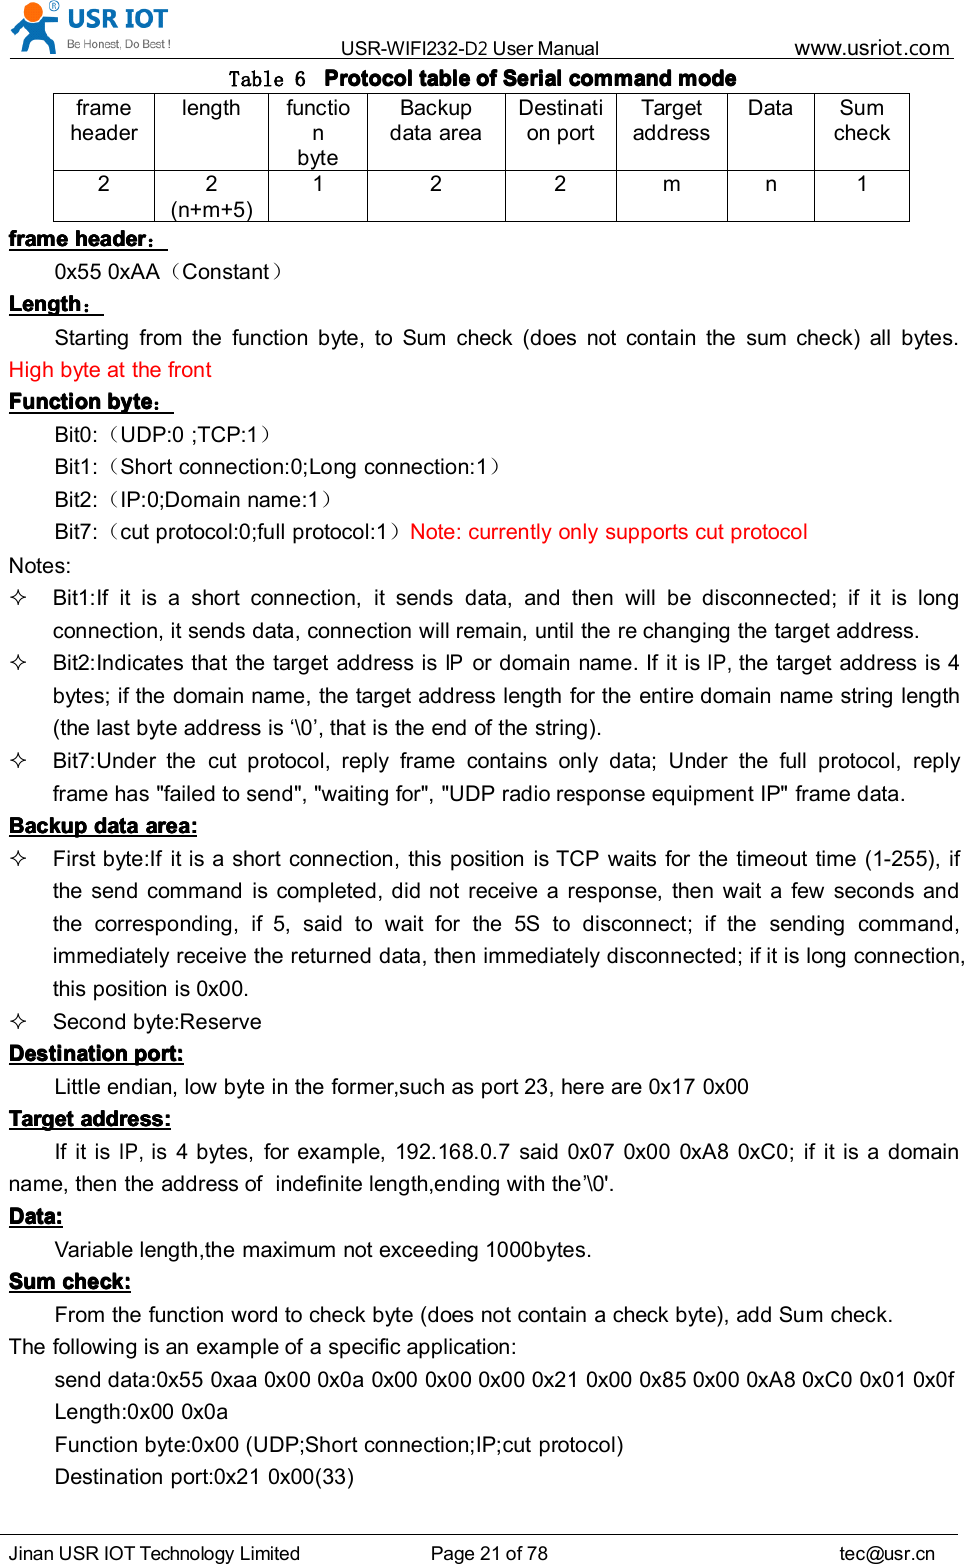 USR-WIFI232- D2 User Manual www.usr iot .comJinan USR IOT Technology Limited Page 21 of 78 tec@usr.cnTable 6 ProtocolProtocolProtocolProtocol tabletabletabletable ofofofof SerialSerialSerialSerial commandcommandcommandcommand modemodemodemodeframeheaderlength functionbyteBackupdata areaDestination portTargetaddressData Sumcheck2 2(n+m+5)1 2 2 m n 1frameframeframeframe headerheaderheaderheader ：0x55 0xAA （Constant ）LengthLengthLengthLength ：Starting from the function byte, to Sum check (does not contain the sum check) all bytes.High byte at the frontFunctionFunctionFunctionFunction bytebytebytebyte ：Bit0: （UDP:0 ;TCP:1 ）Bit1: （Short connection:0;Long connection:1 ）Bit2: （IP:0;Domain name:1 ）Bit7: （cut protocol:0;full protocol:1 ）Note: currently only supports cut protocolNotes:Bit1:If it is a short connection, it sends data, and then will be disconnected; if it is longconnection, it sends data, connection will remain, until the re changing the target address.Bit2:Indicates that the target address isIPor domain name. If it isIP,the target address is 4bytes; if the domain name, the target address length for the entire domain name string length(the last byte address is ‘ \0 ’ , that is the end of the string).Bit7:Under the cut protocol, reply frame contains only data; Under the full protocol, replyframe has &quot;failed to send&quot;, &quot;waiting for&quot;, &quot;UDP radio response equipment IP&quot; frame data.BackupBackupBackupBackup datadatadatadata areaareaareaarea ::::First byte:If it is a short connection, this position is TCP waits for the timeout time (1-255), ifthe send command is completed, did not receive a response, then wait a few seconds andthe corresponding, if 5, said to wait for the 5S to disconnect; if the sending command,immediately receive the returned data, then immediately disconnected; if it is long connection,this position is 0x00.Second byte:ReserveDestinationDestinationDestinationDestination portportportport ::::Little endian, low byte in the former,such as port 23, here are 0x17 0x00TargetTargetTargetTarget address:address:address:address:If it isIP,is 4 bytes, for example, 192.168.0.7 said 0x07 0x00 0xA8 0xC0; if it is a domainname, then the address of indefinite length,ending with the ’ \0&apos;.Data:Data:Data:Data:Variable length,the maximum not exceeding 1000bytes.SumSumSumSum check:check:check:check:From the function word to check byte (does not contain a check byte), add Sum check.The following is an example of a specific application:send data:0x55 0xaa 0x00 0x0a 0x00 0x00 0x00 0x21 0x00 0x85 0x00 0xA8 0xC0 0x01 0x0fLength:0x00 0x0aFunction byte:0x00 (UDP;Short connection;IP;cut protocol)Destination port :0x21 0x00(33)